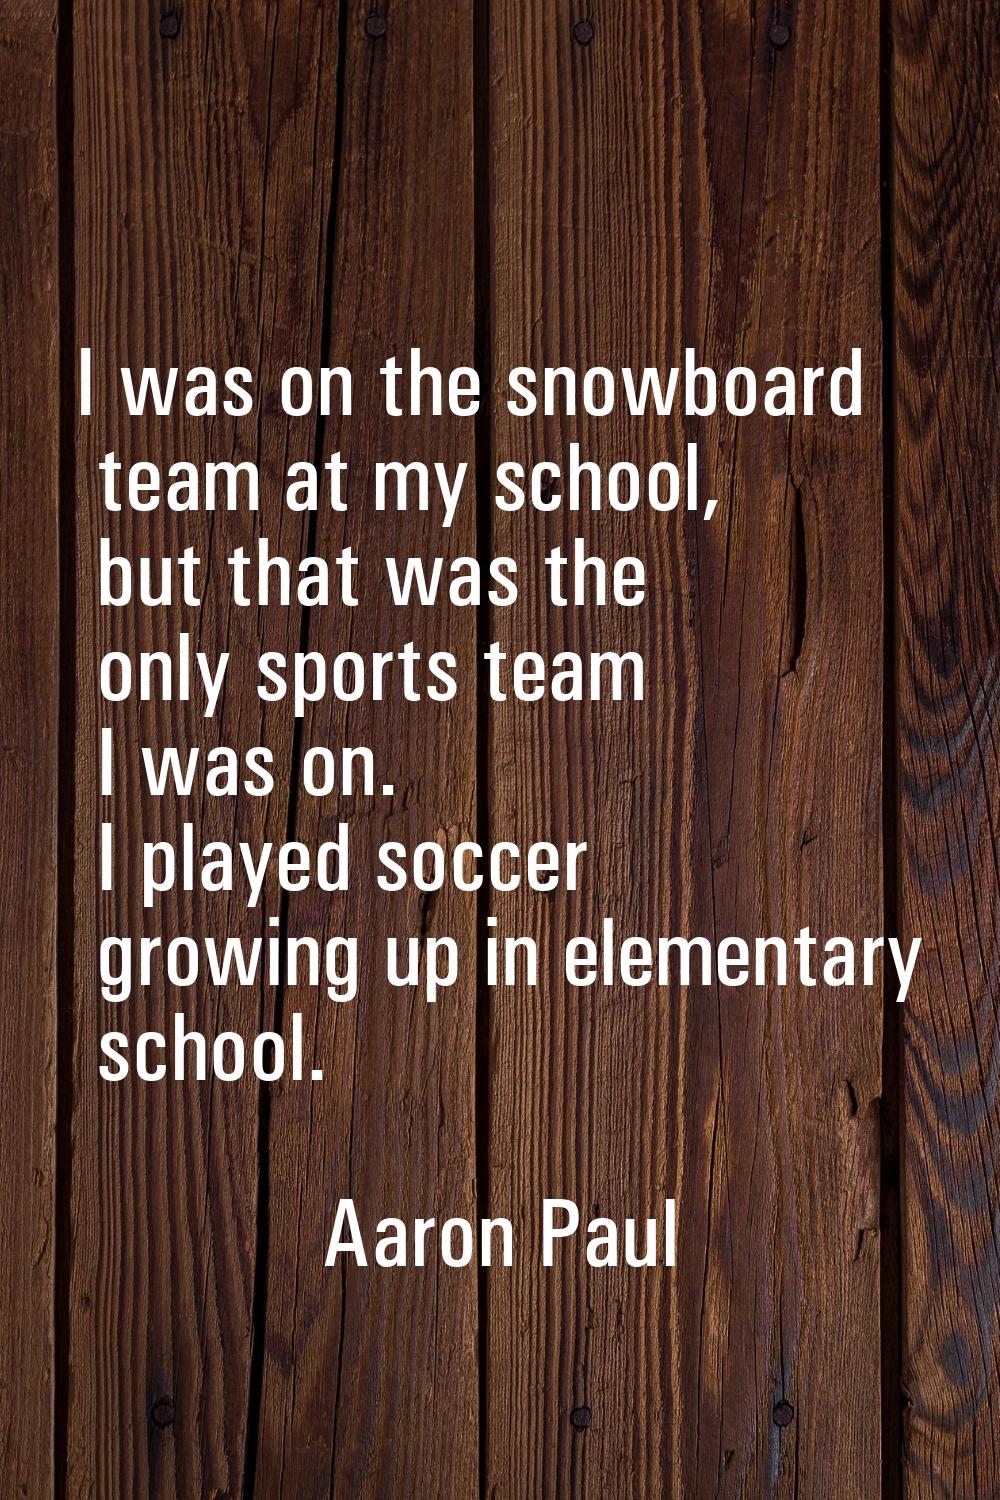 I was on the snowboard team at my school, but that was the only sports team I was on. I played socc